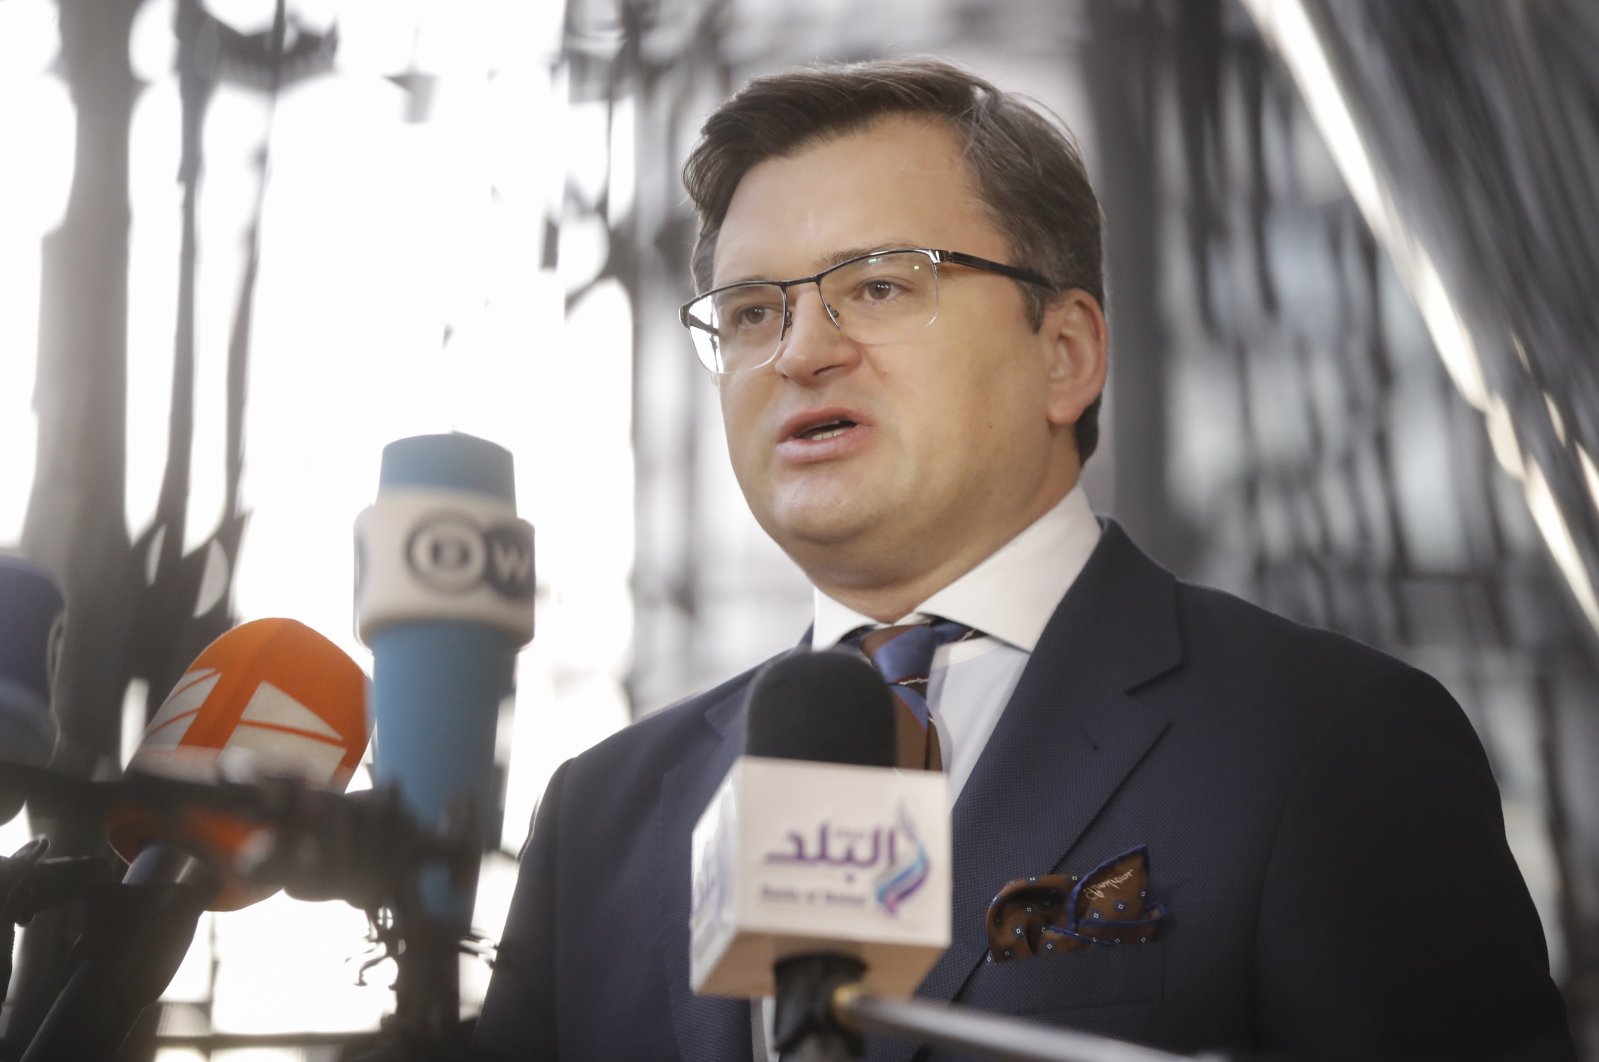 Ukrainian Foreign Minister Dmytro Kuleba speaks to the press as he arrives for the EU Foreign Affairs Council meeting in Brussels, Belgium, Feb. 21, 2022. (EPA Photo)